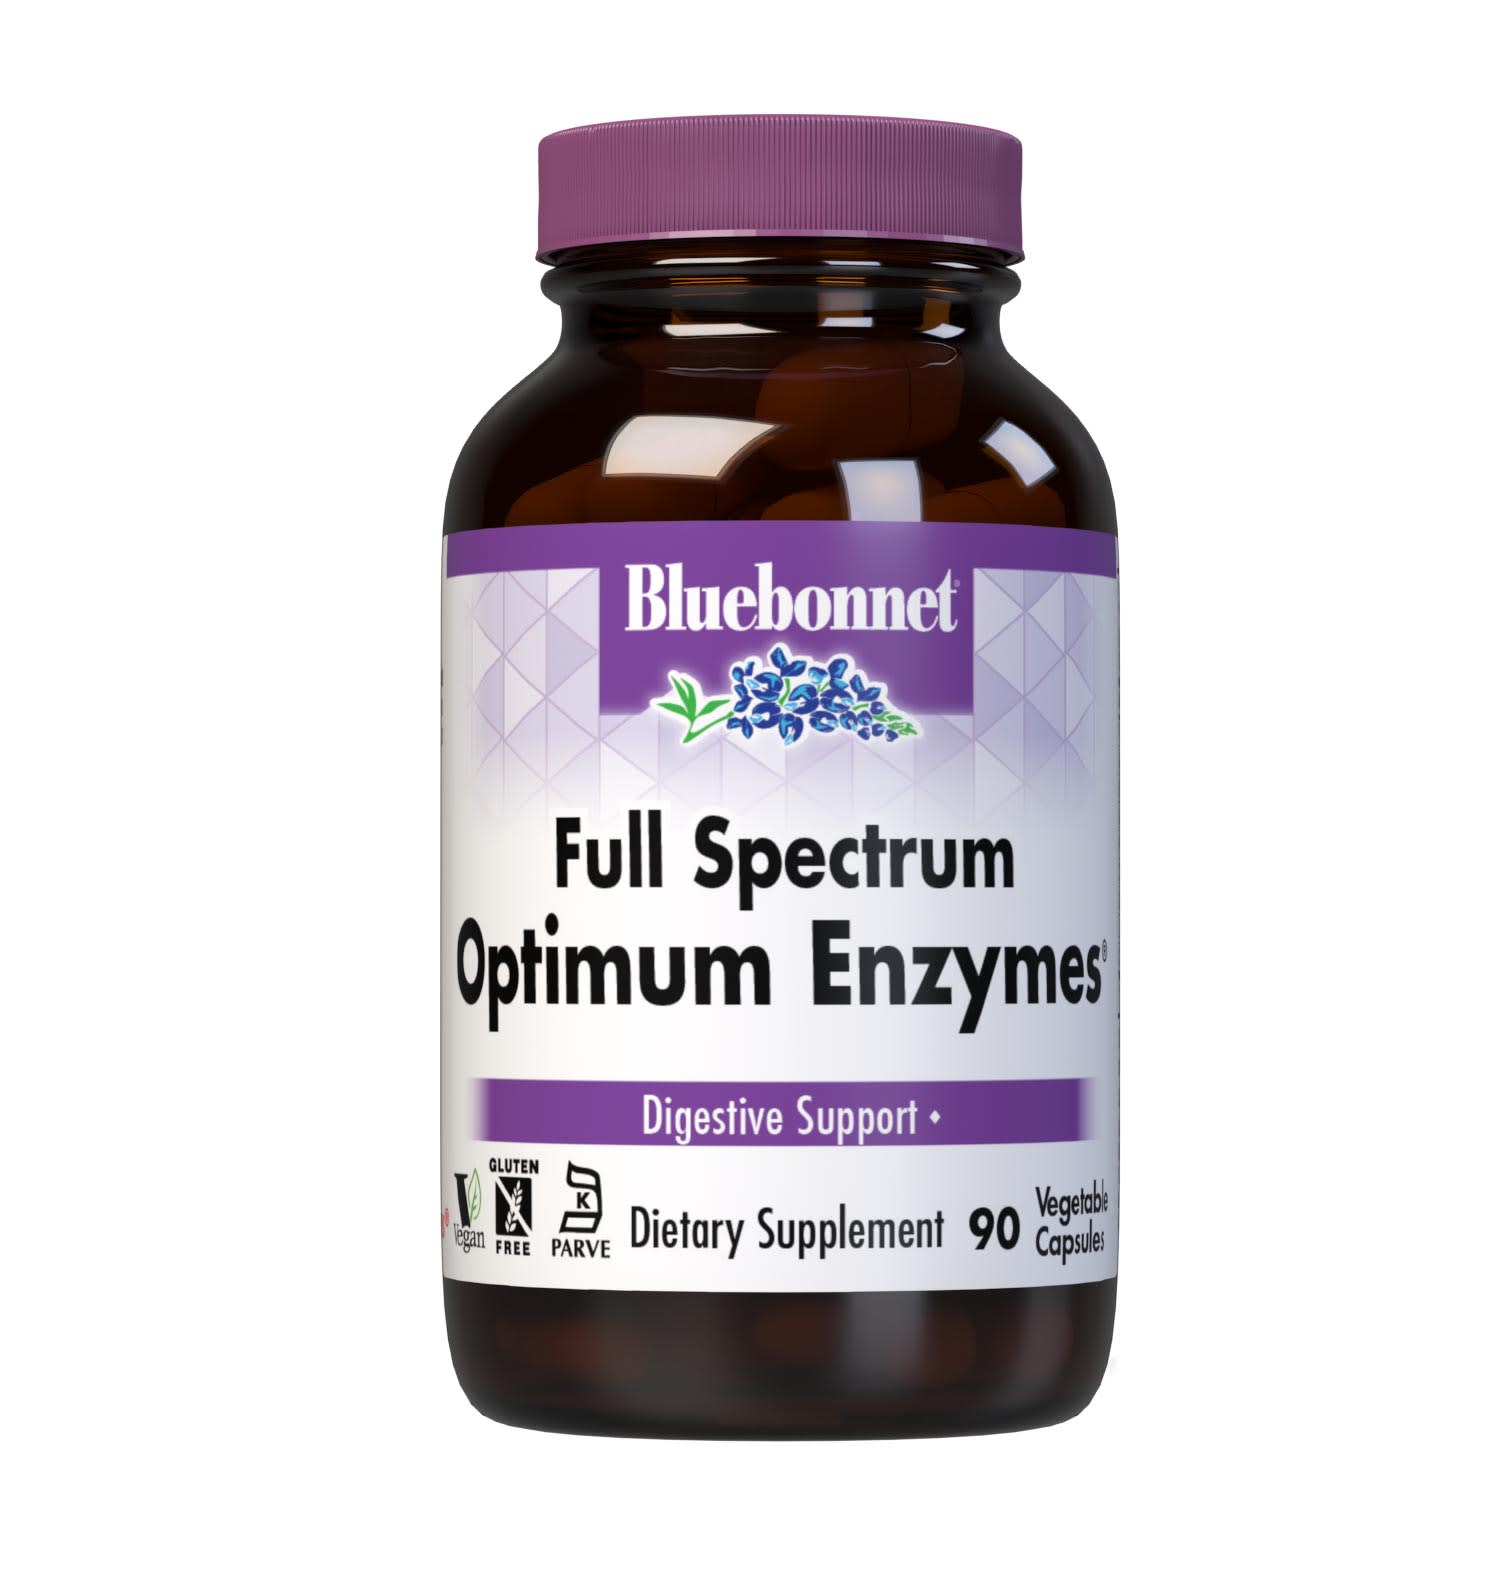 Bluebonnet’s Full Spectrum Optimum Enzymes 90 Vegetable Capsules are formulated with a combination of plant-based enzymes that help support the breakdown of protein, carbohydrates, and fats for digestive health. #size_90 count